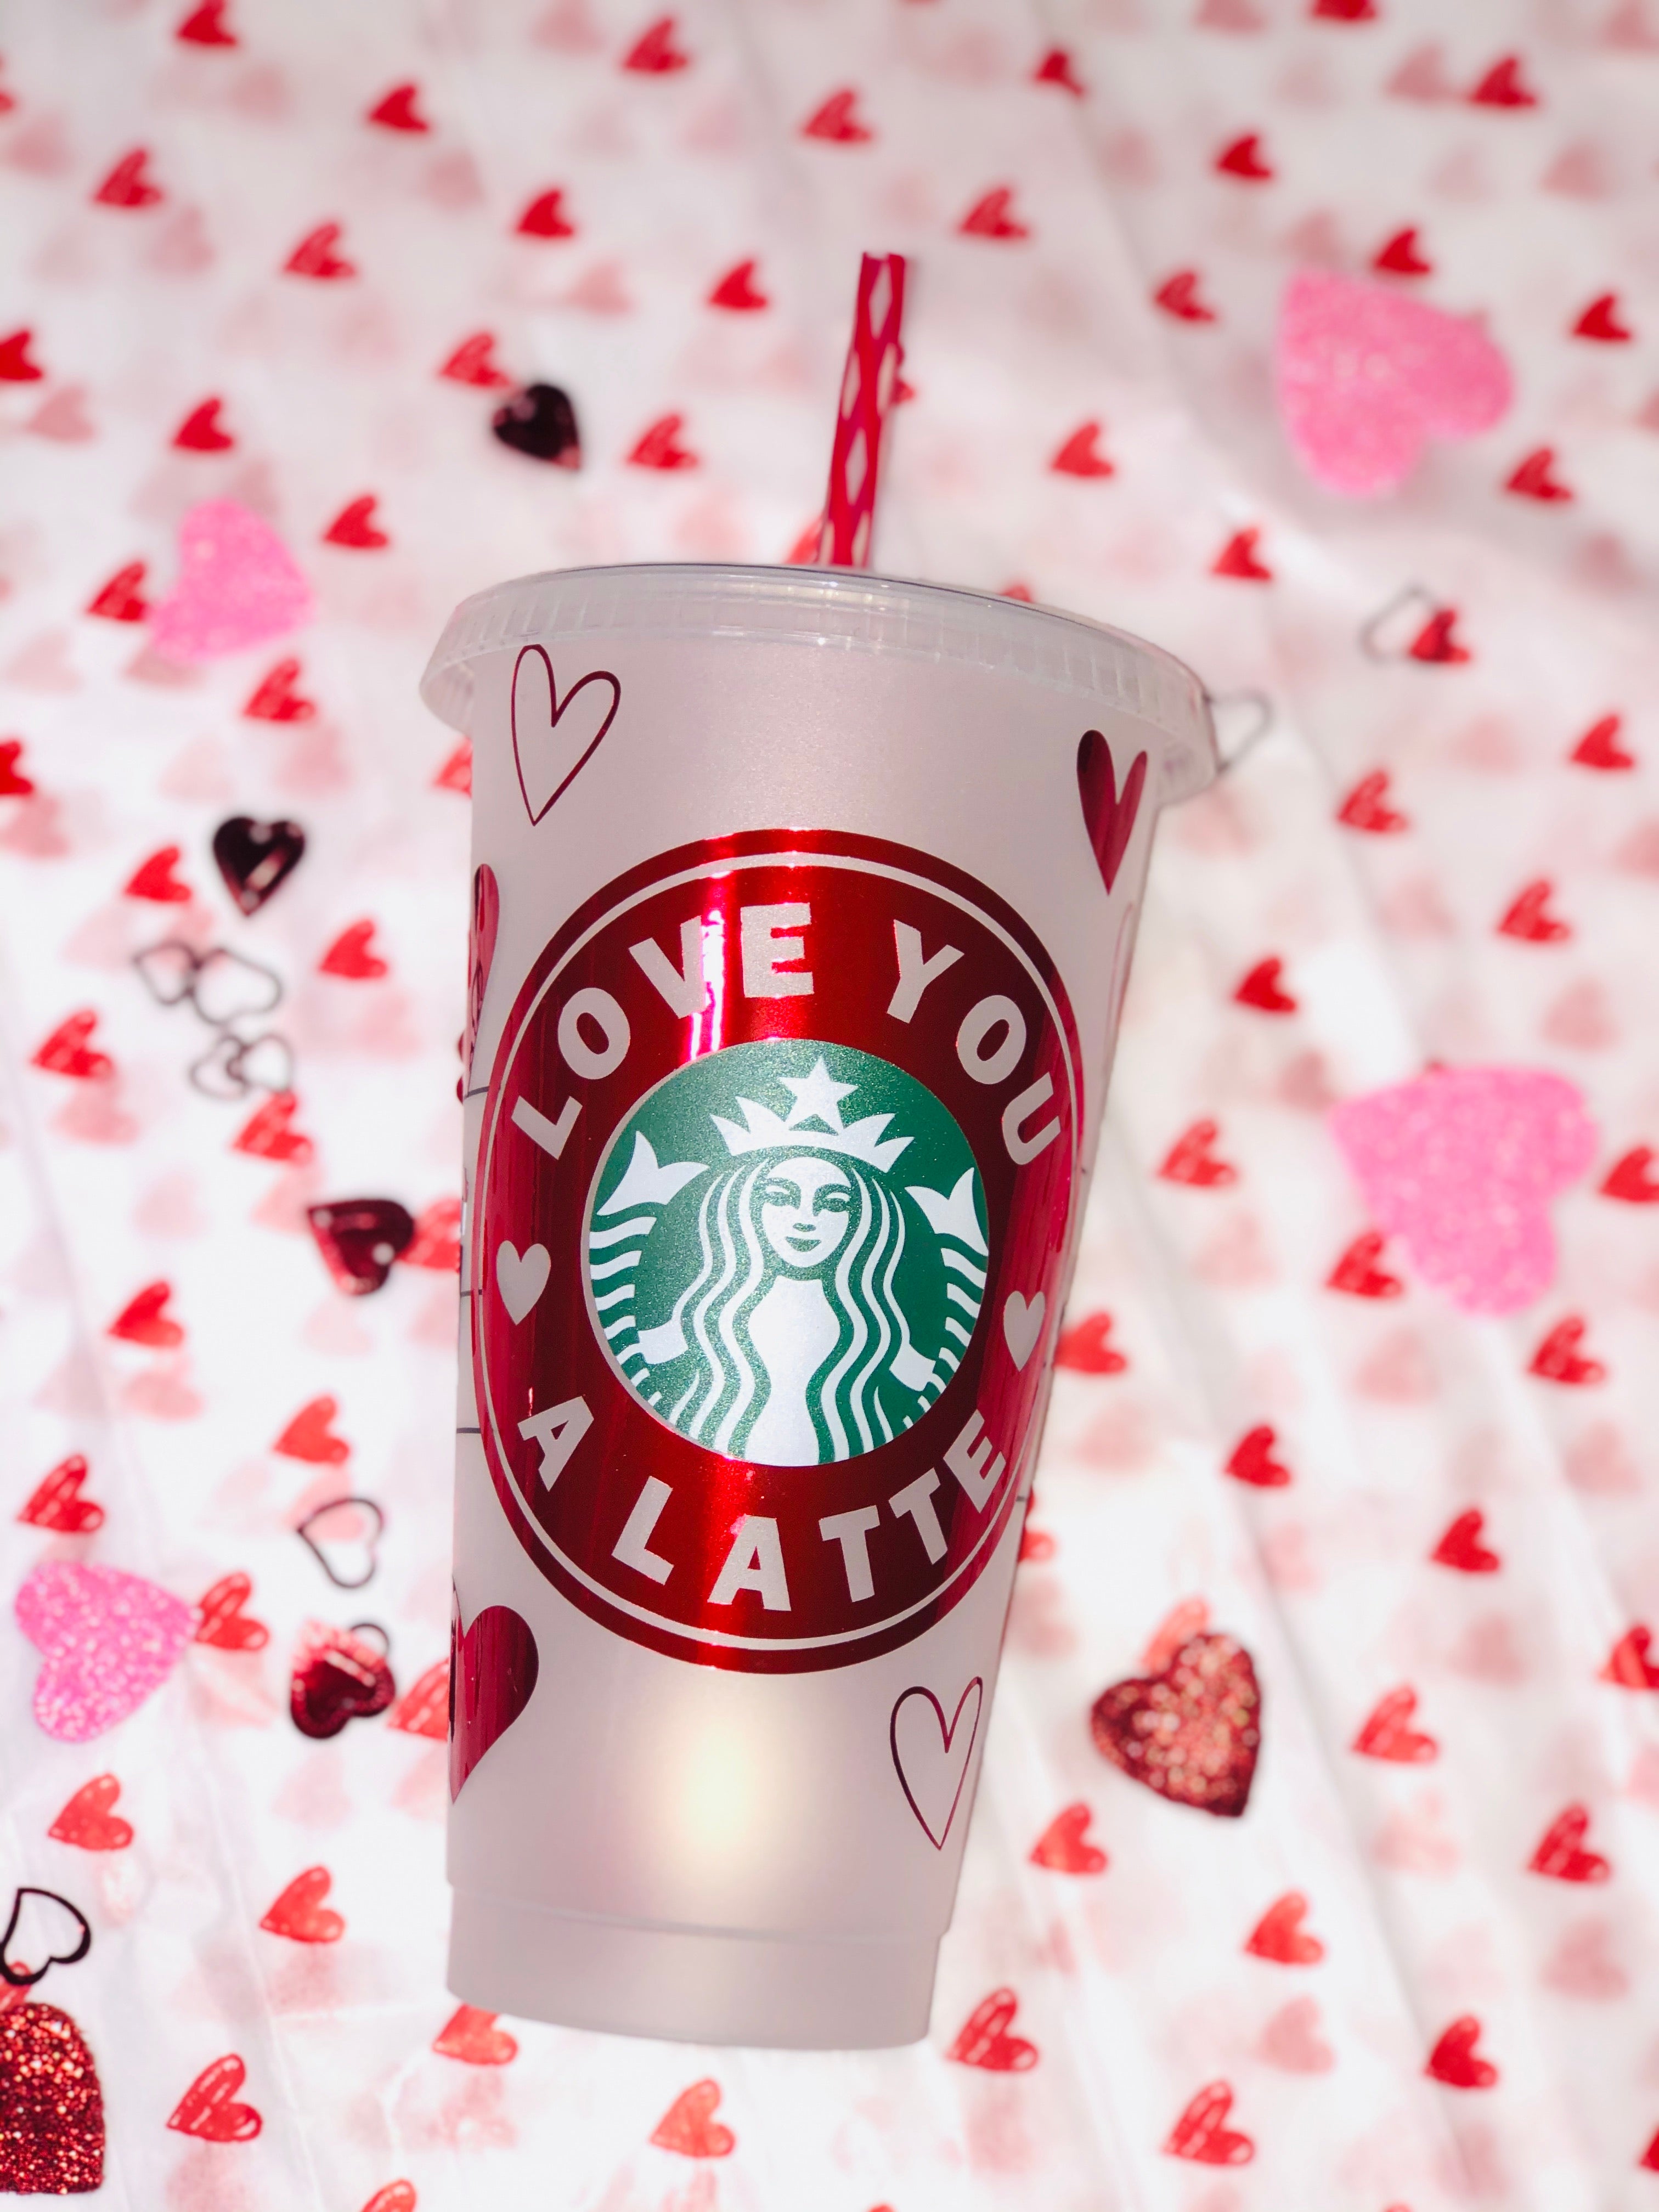 Personalized Starbucks Reusable Cup Valentines Add Name for Free